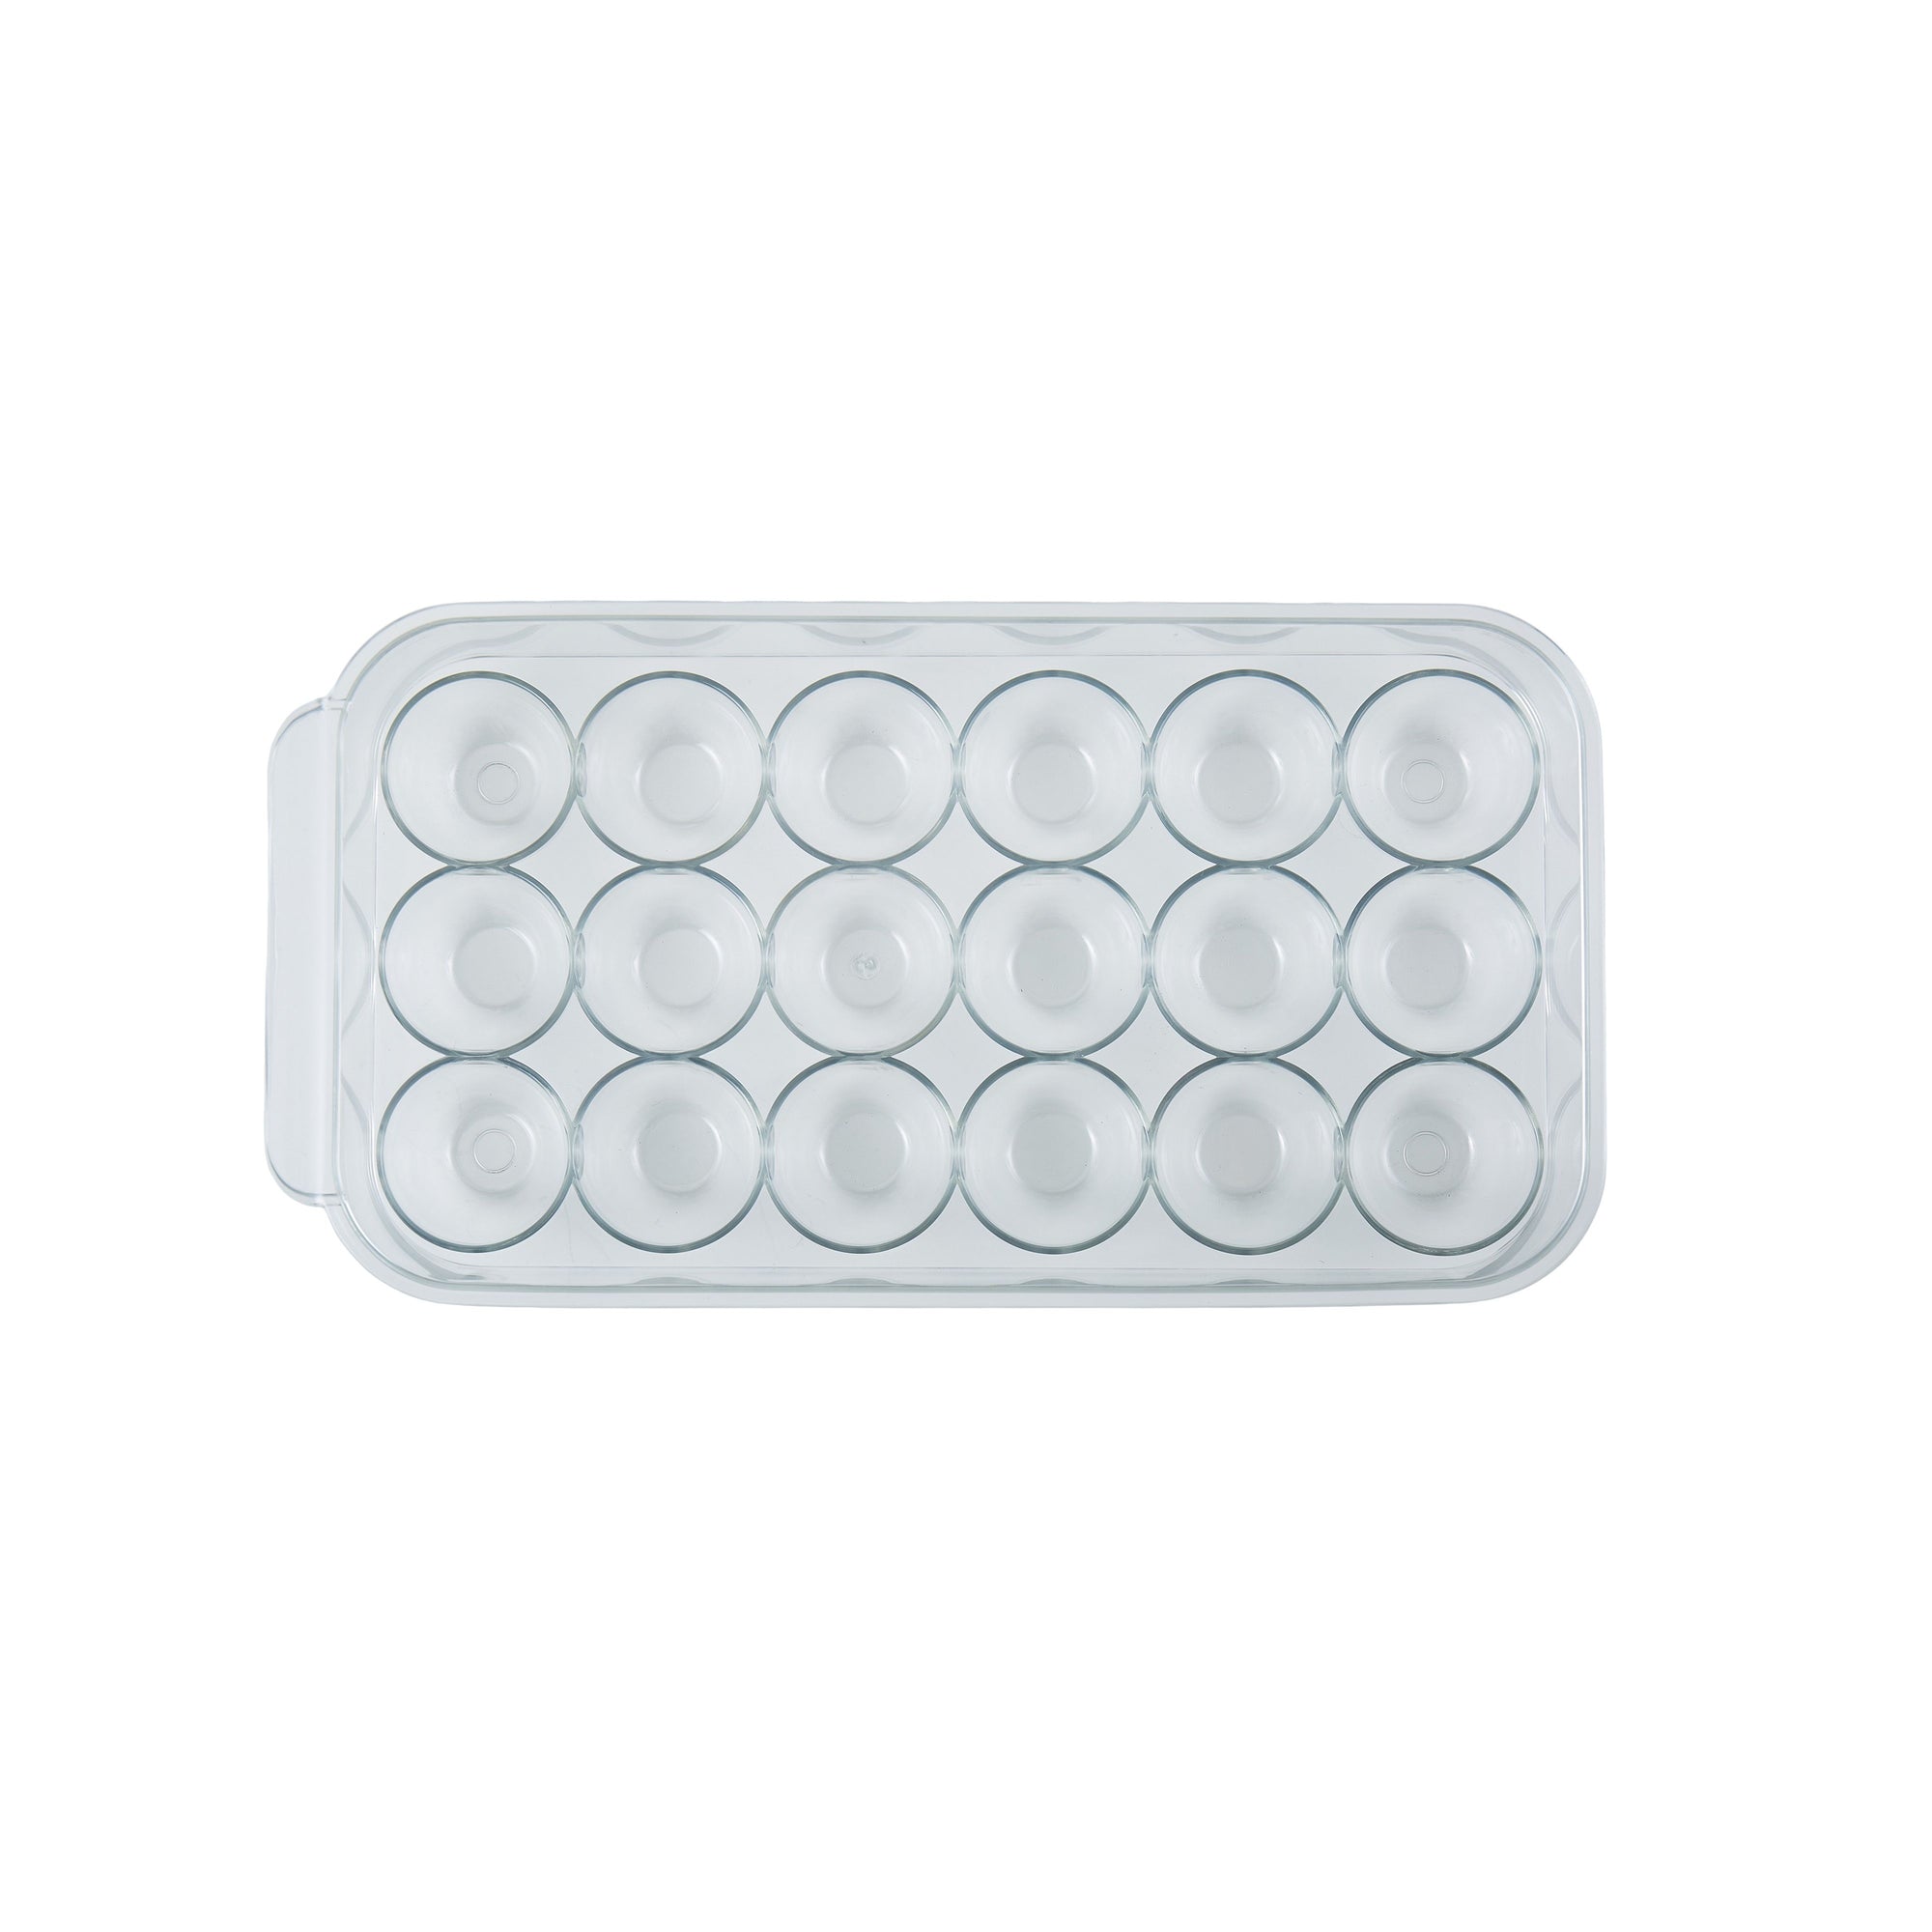 Egg Tray Holder with Lid!